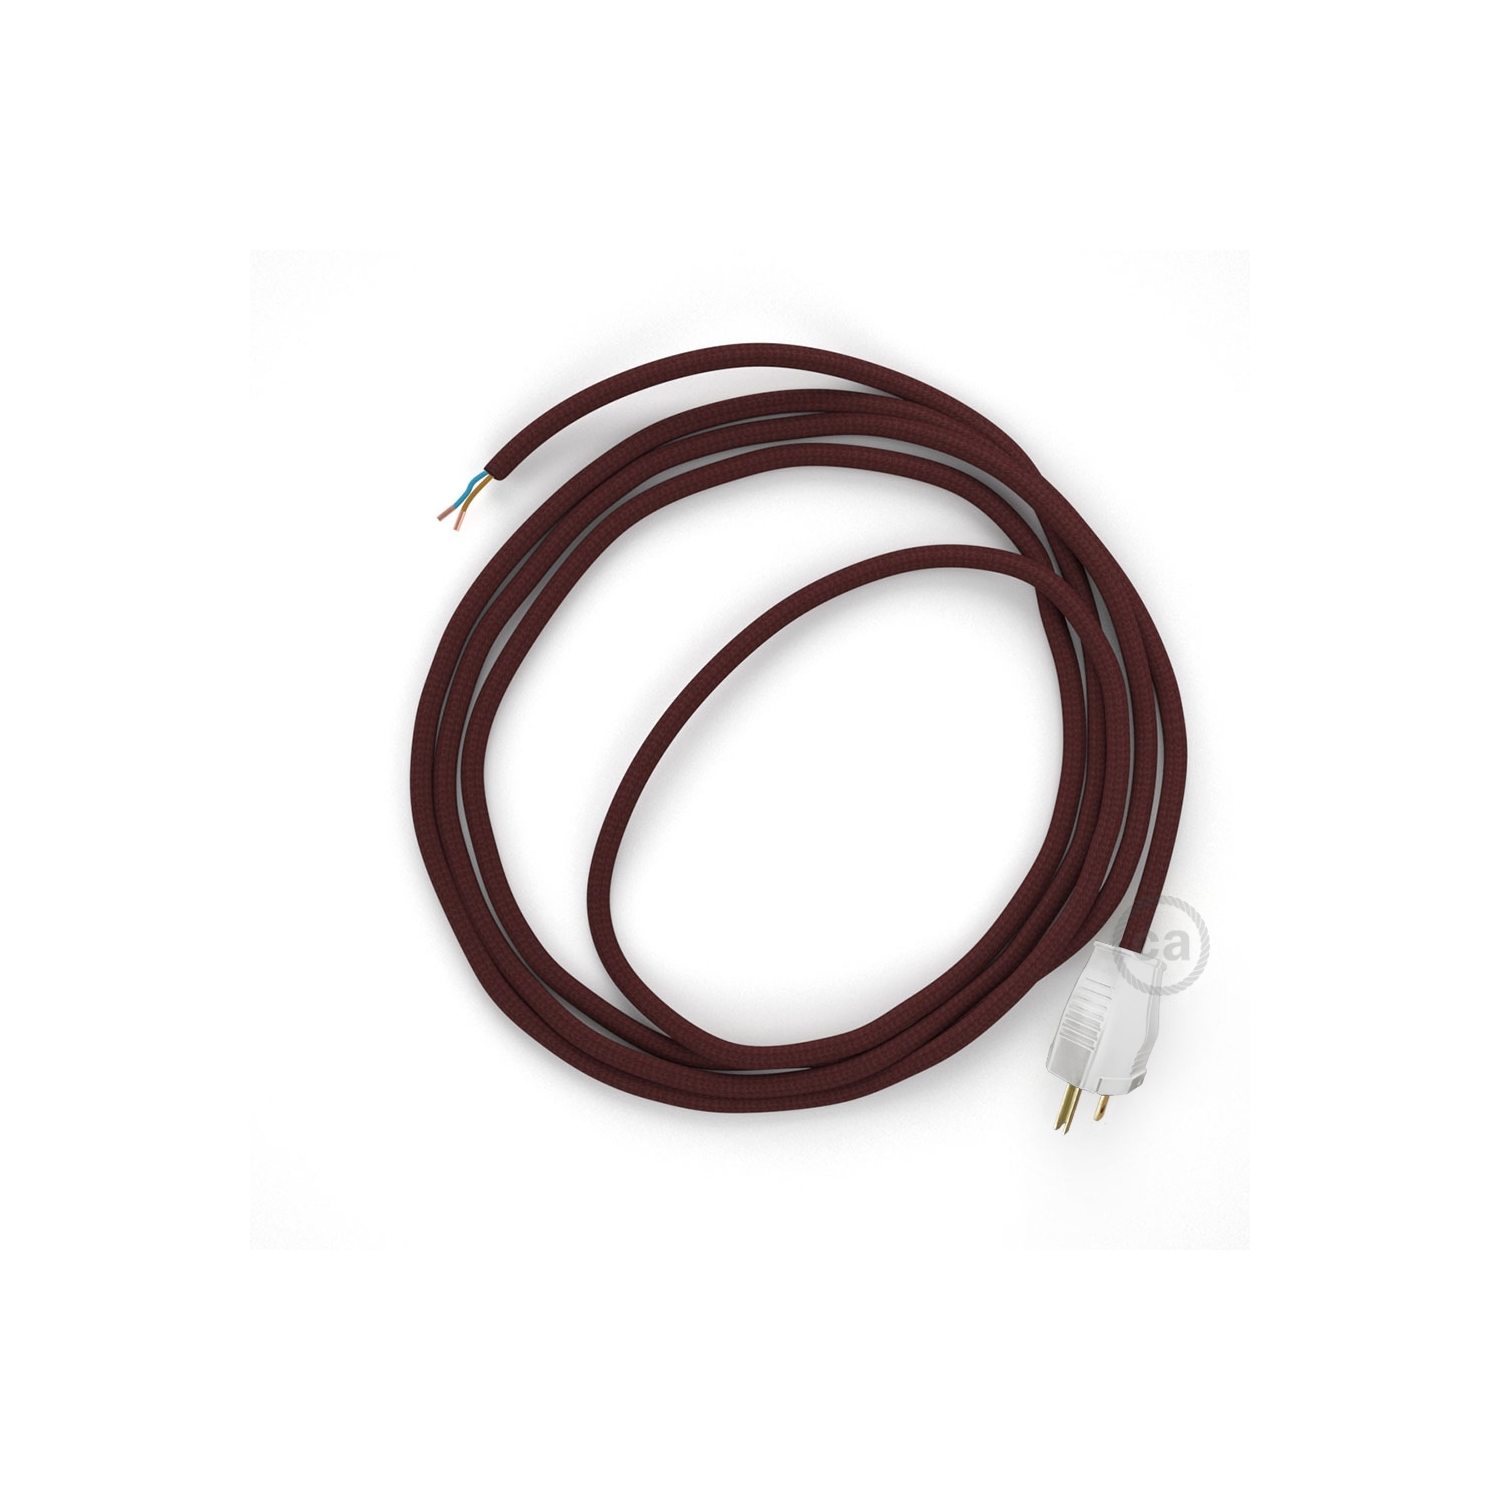 Cord-set - RM19 Burgundy Rayon Covered Round Cable